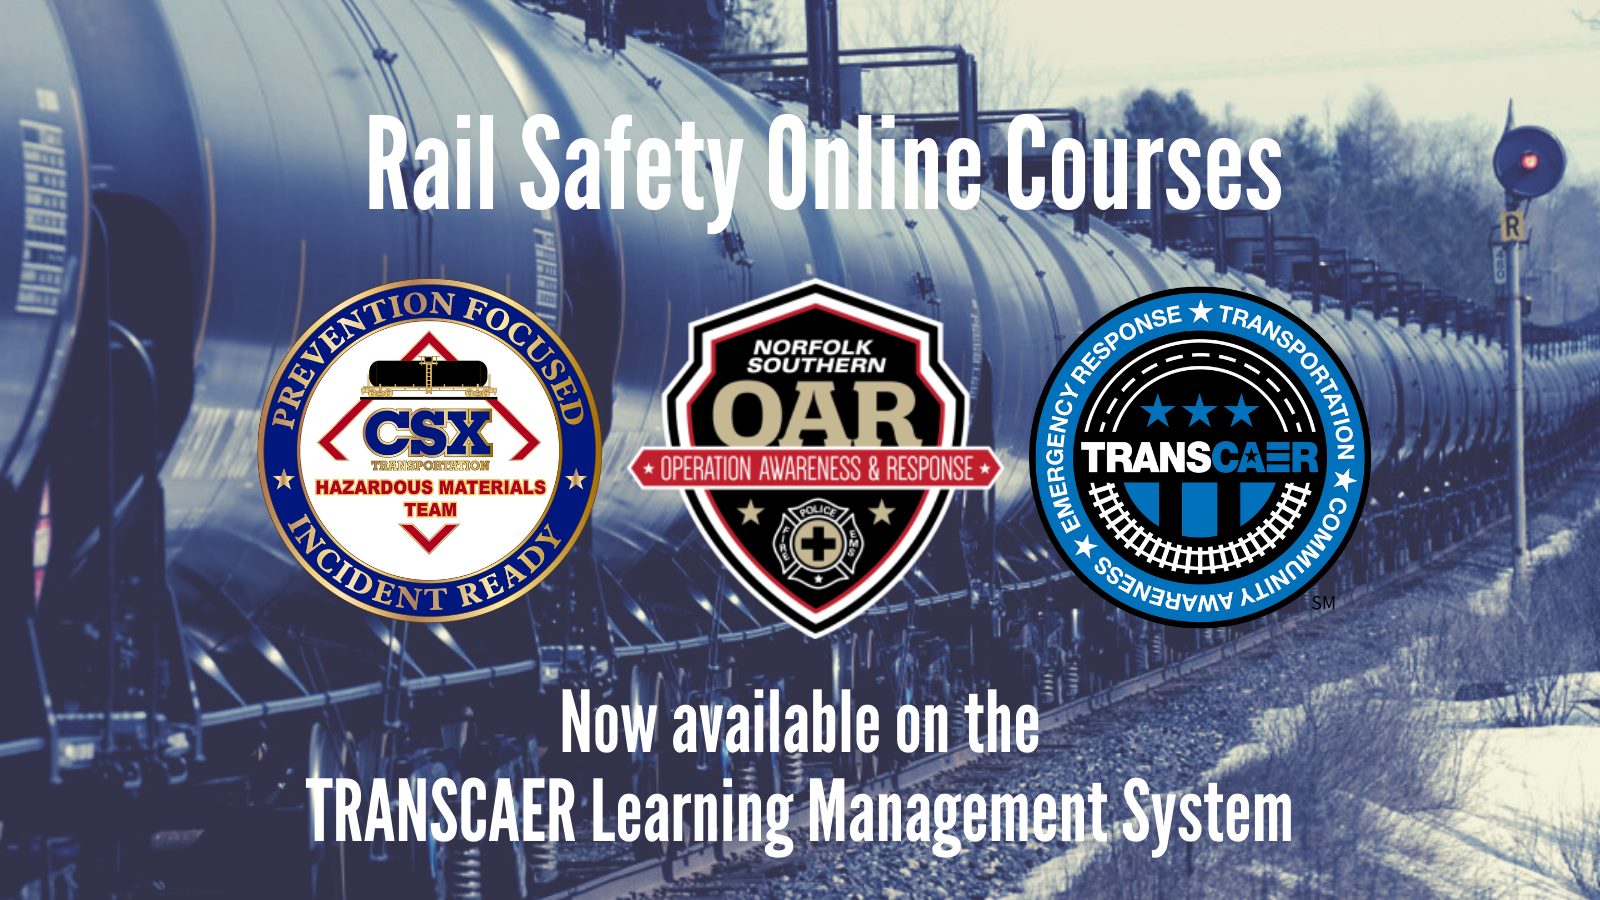 Rail Safety Online Courses. Now available on the TRANSCAER Learning Management System Image